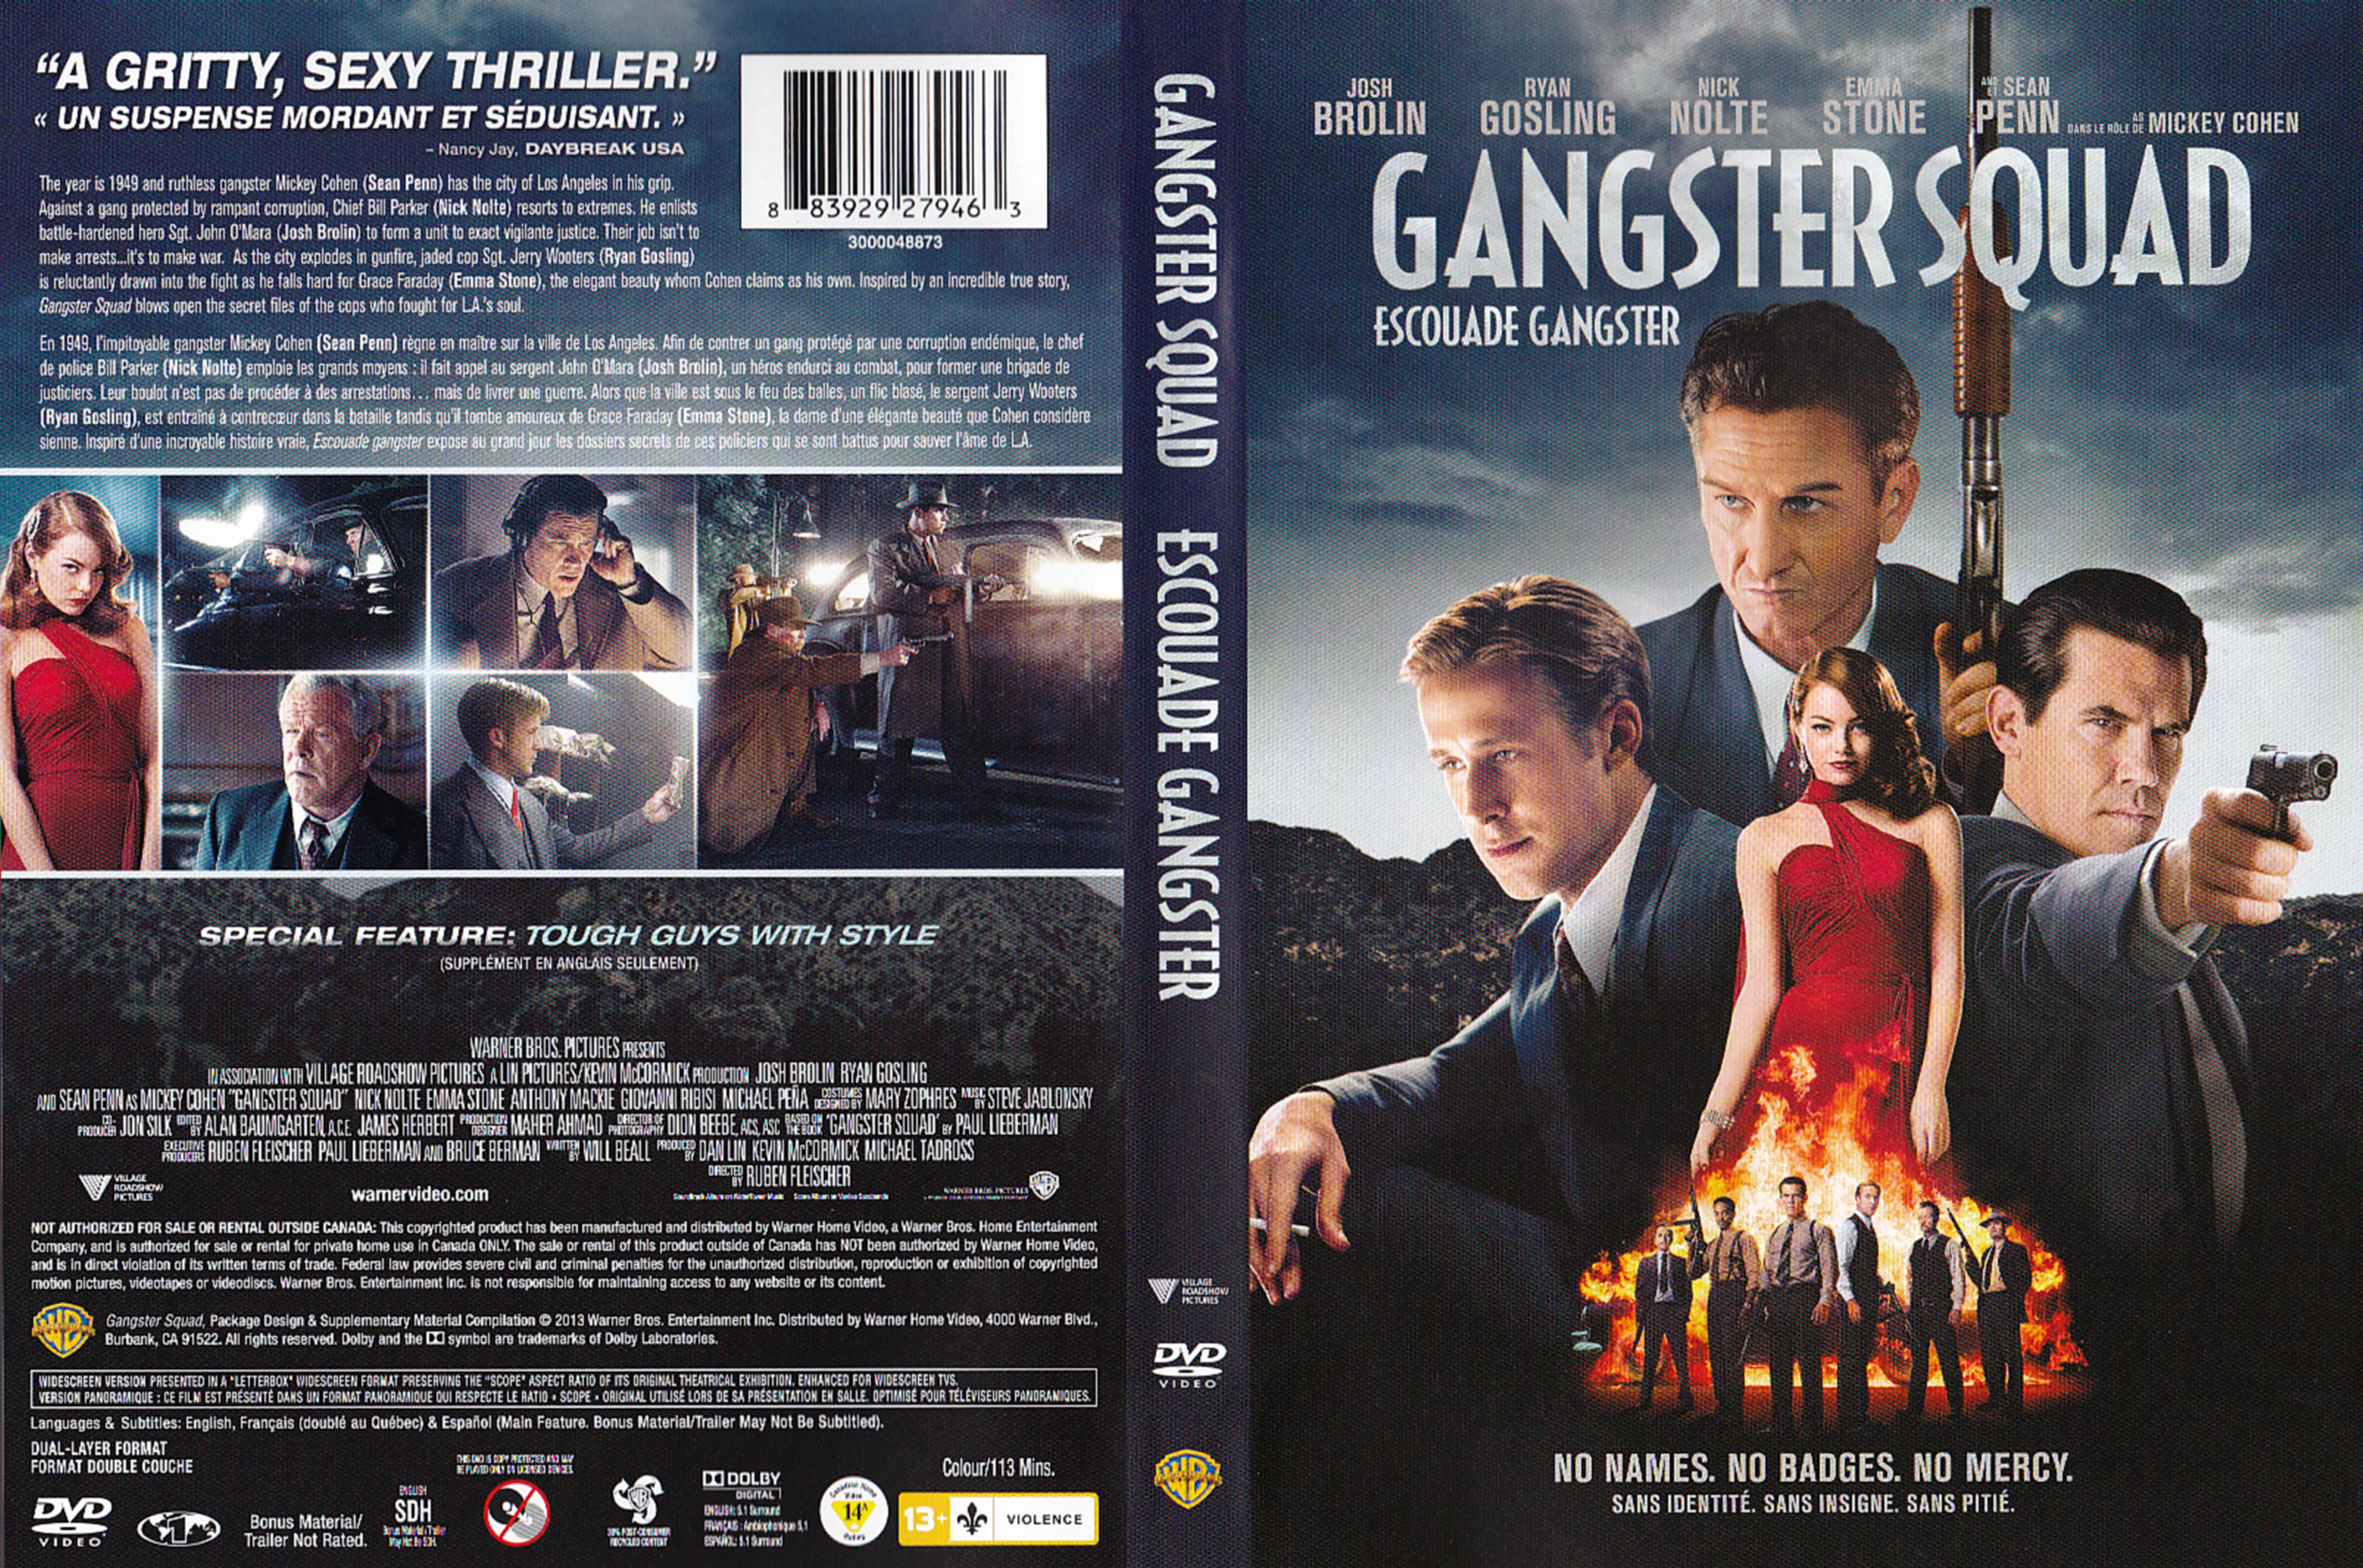 Jaquette DVD Gangster squad (Canadienne)